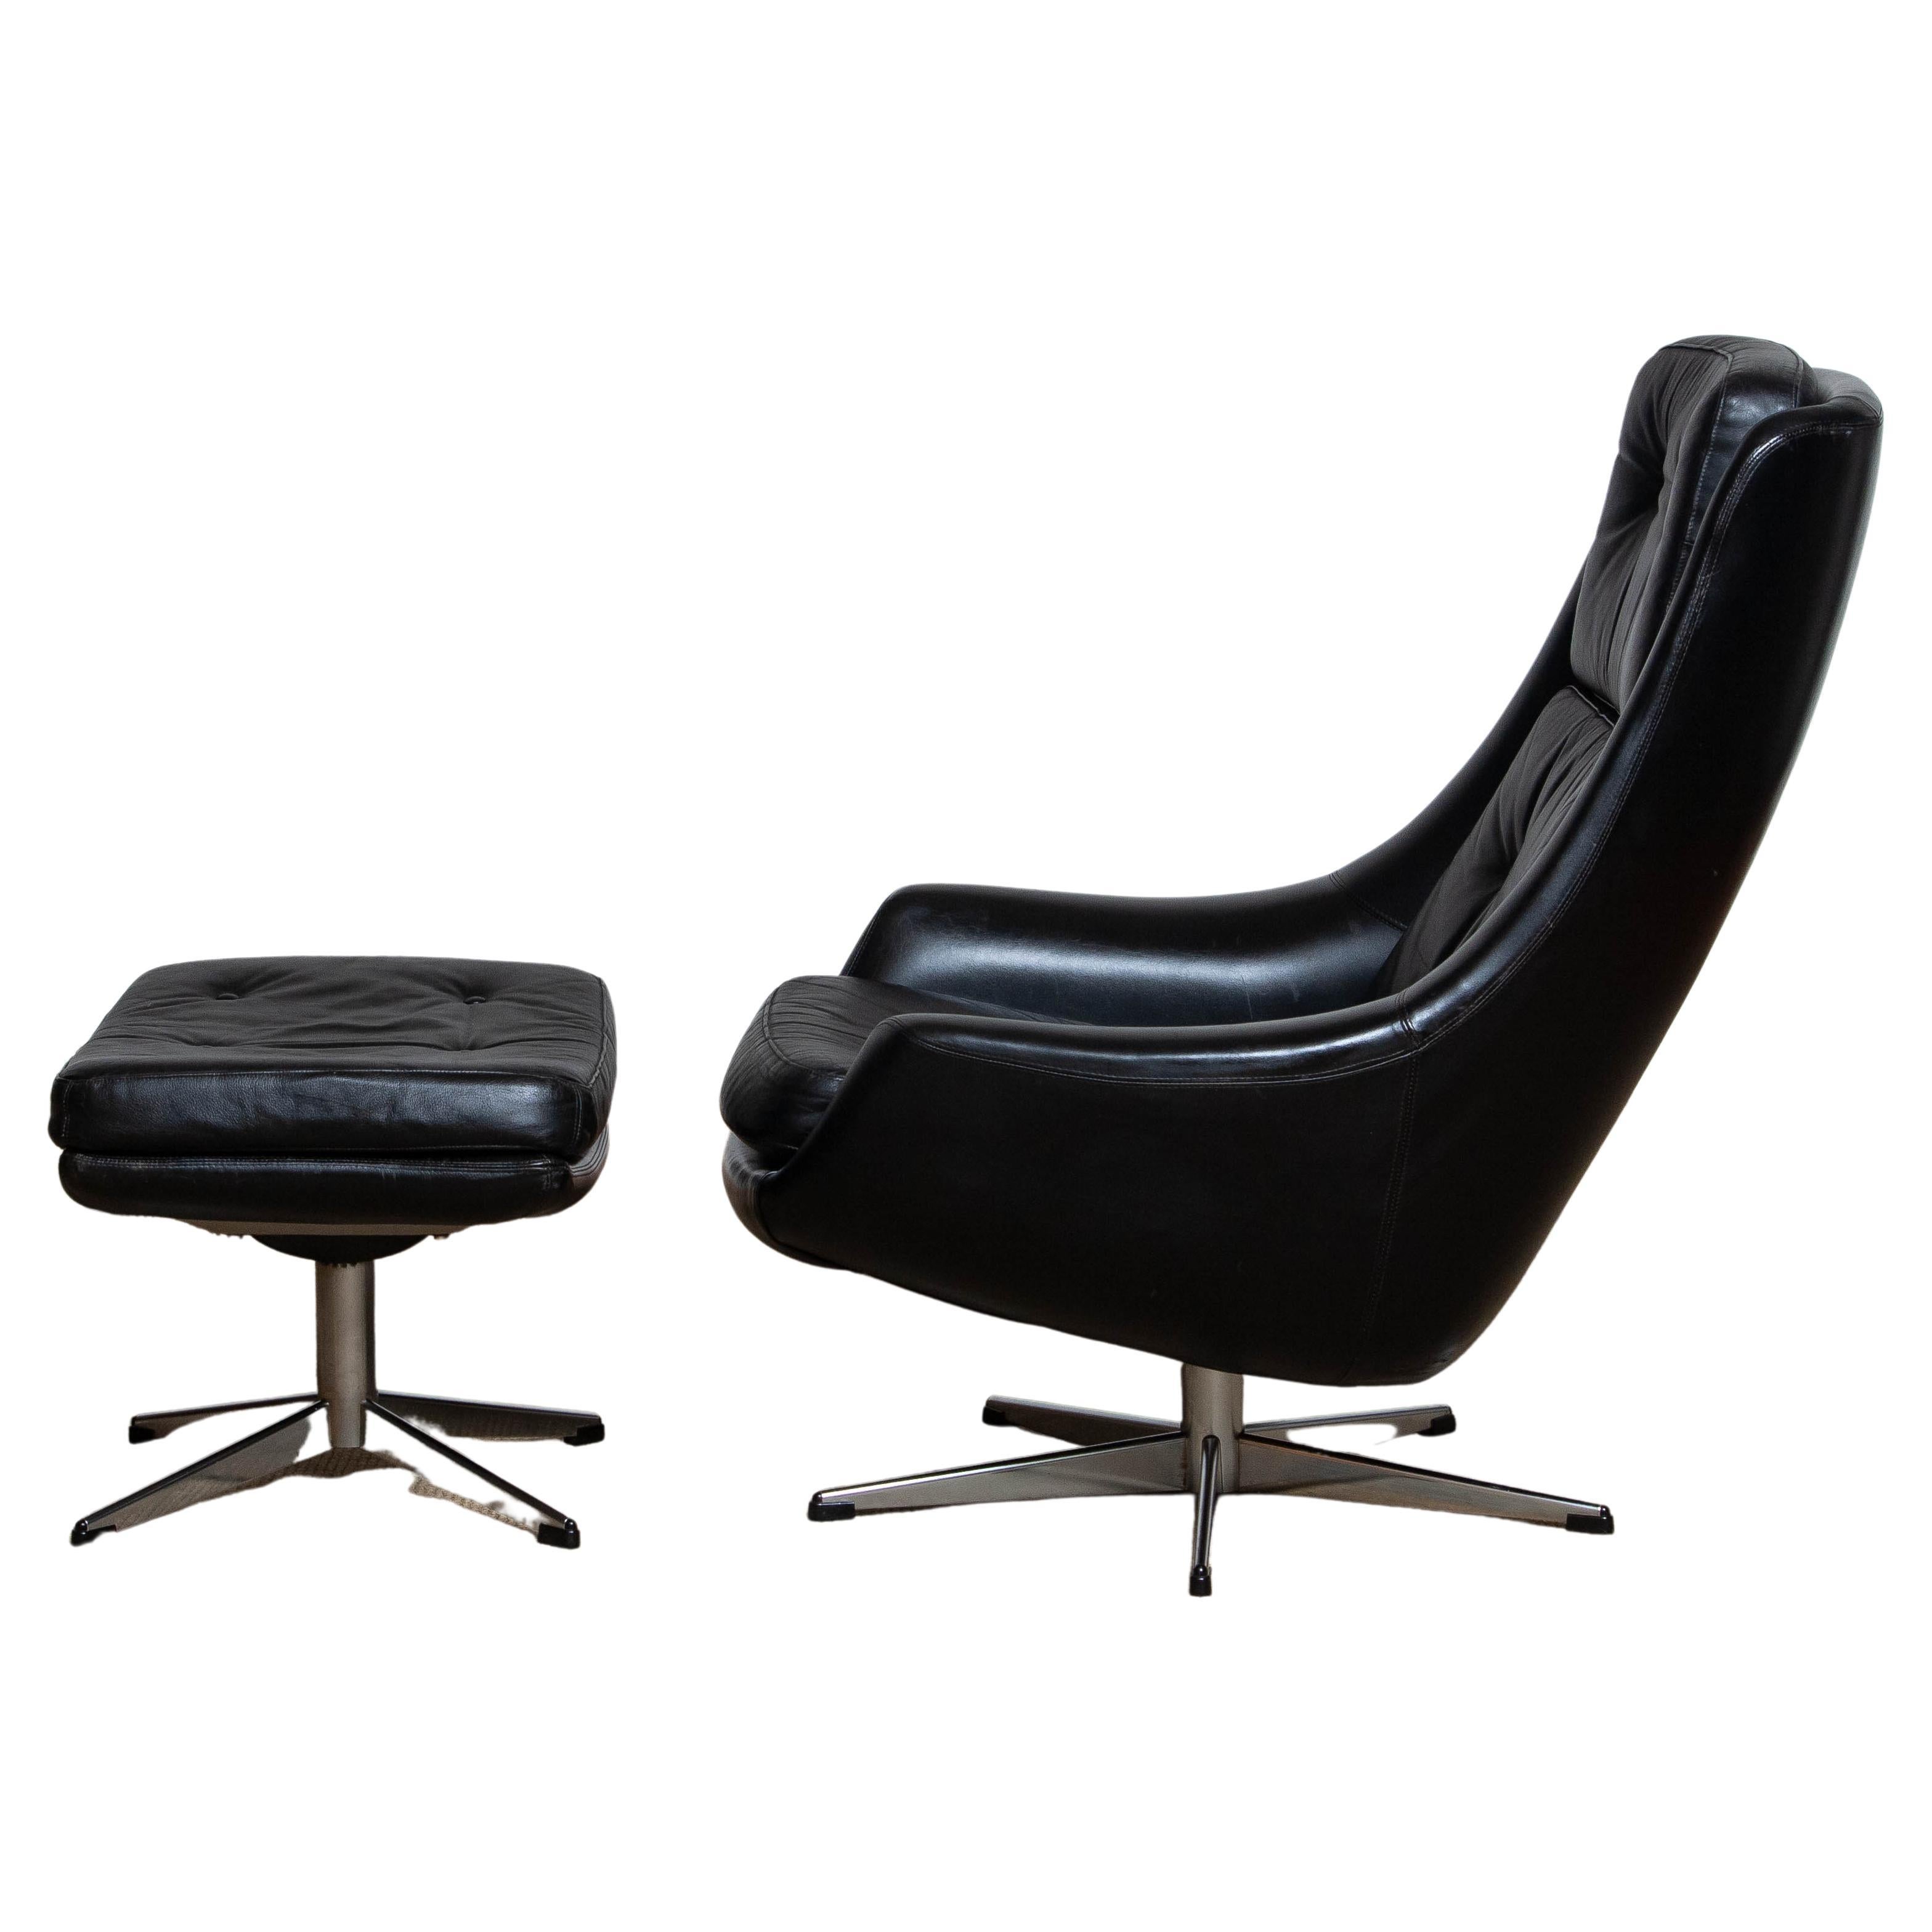 1960s Black Leather Swivel Chair with Matching Ottoman by H.W. Klein for Bramin